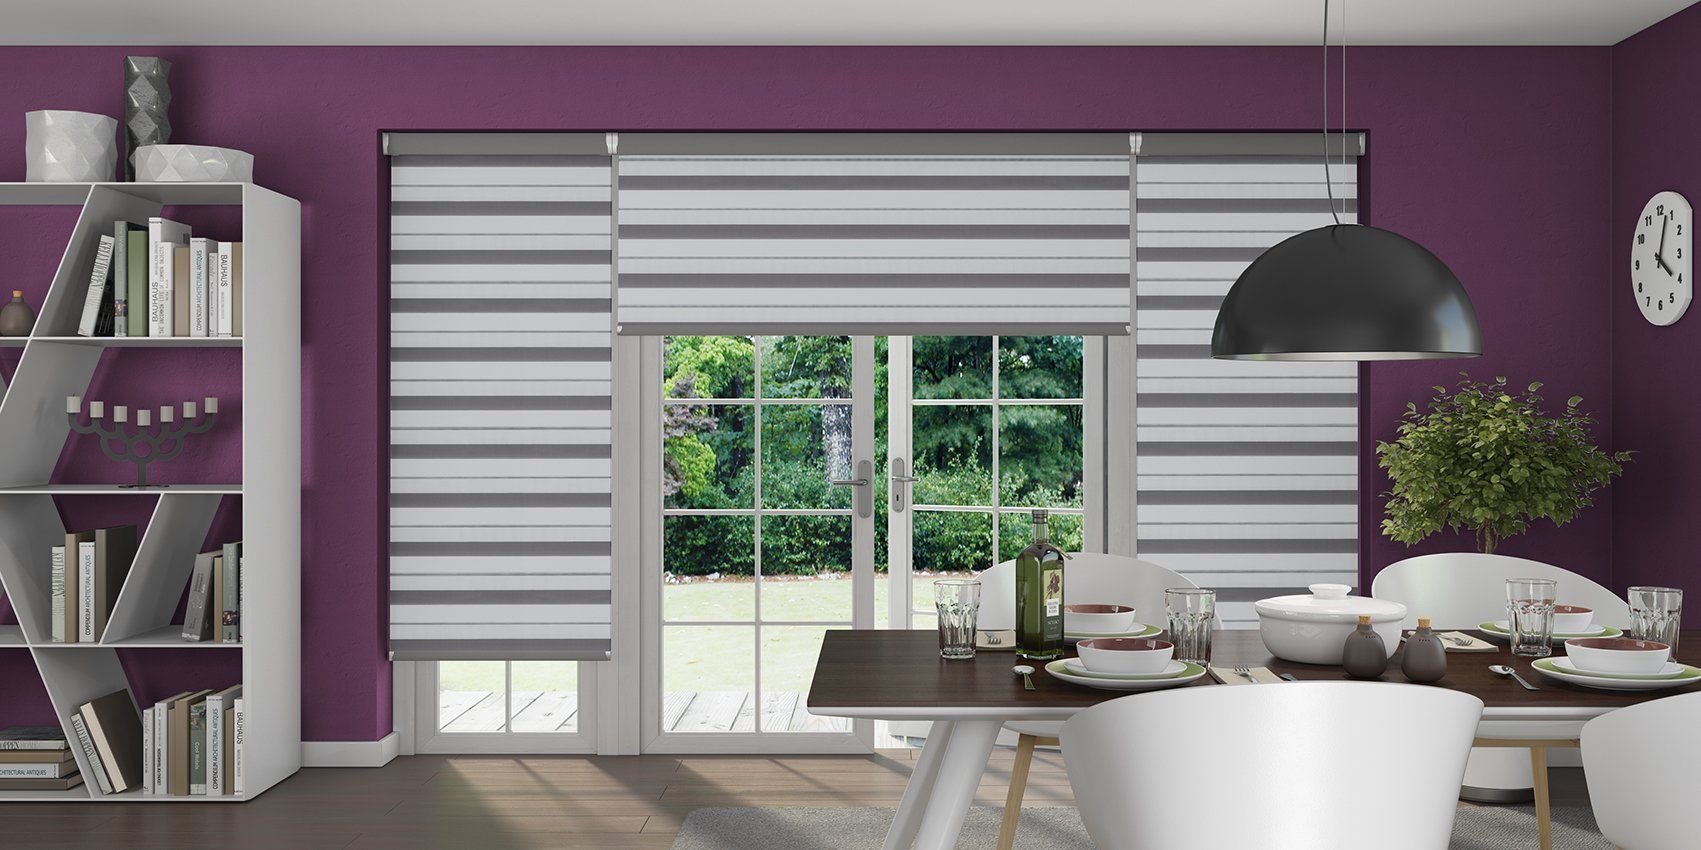 Vision day night blinds-2 tone